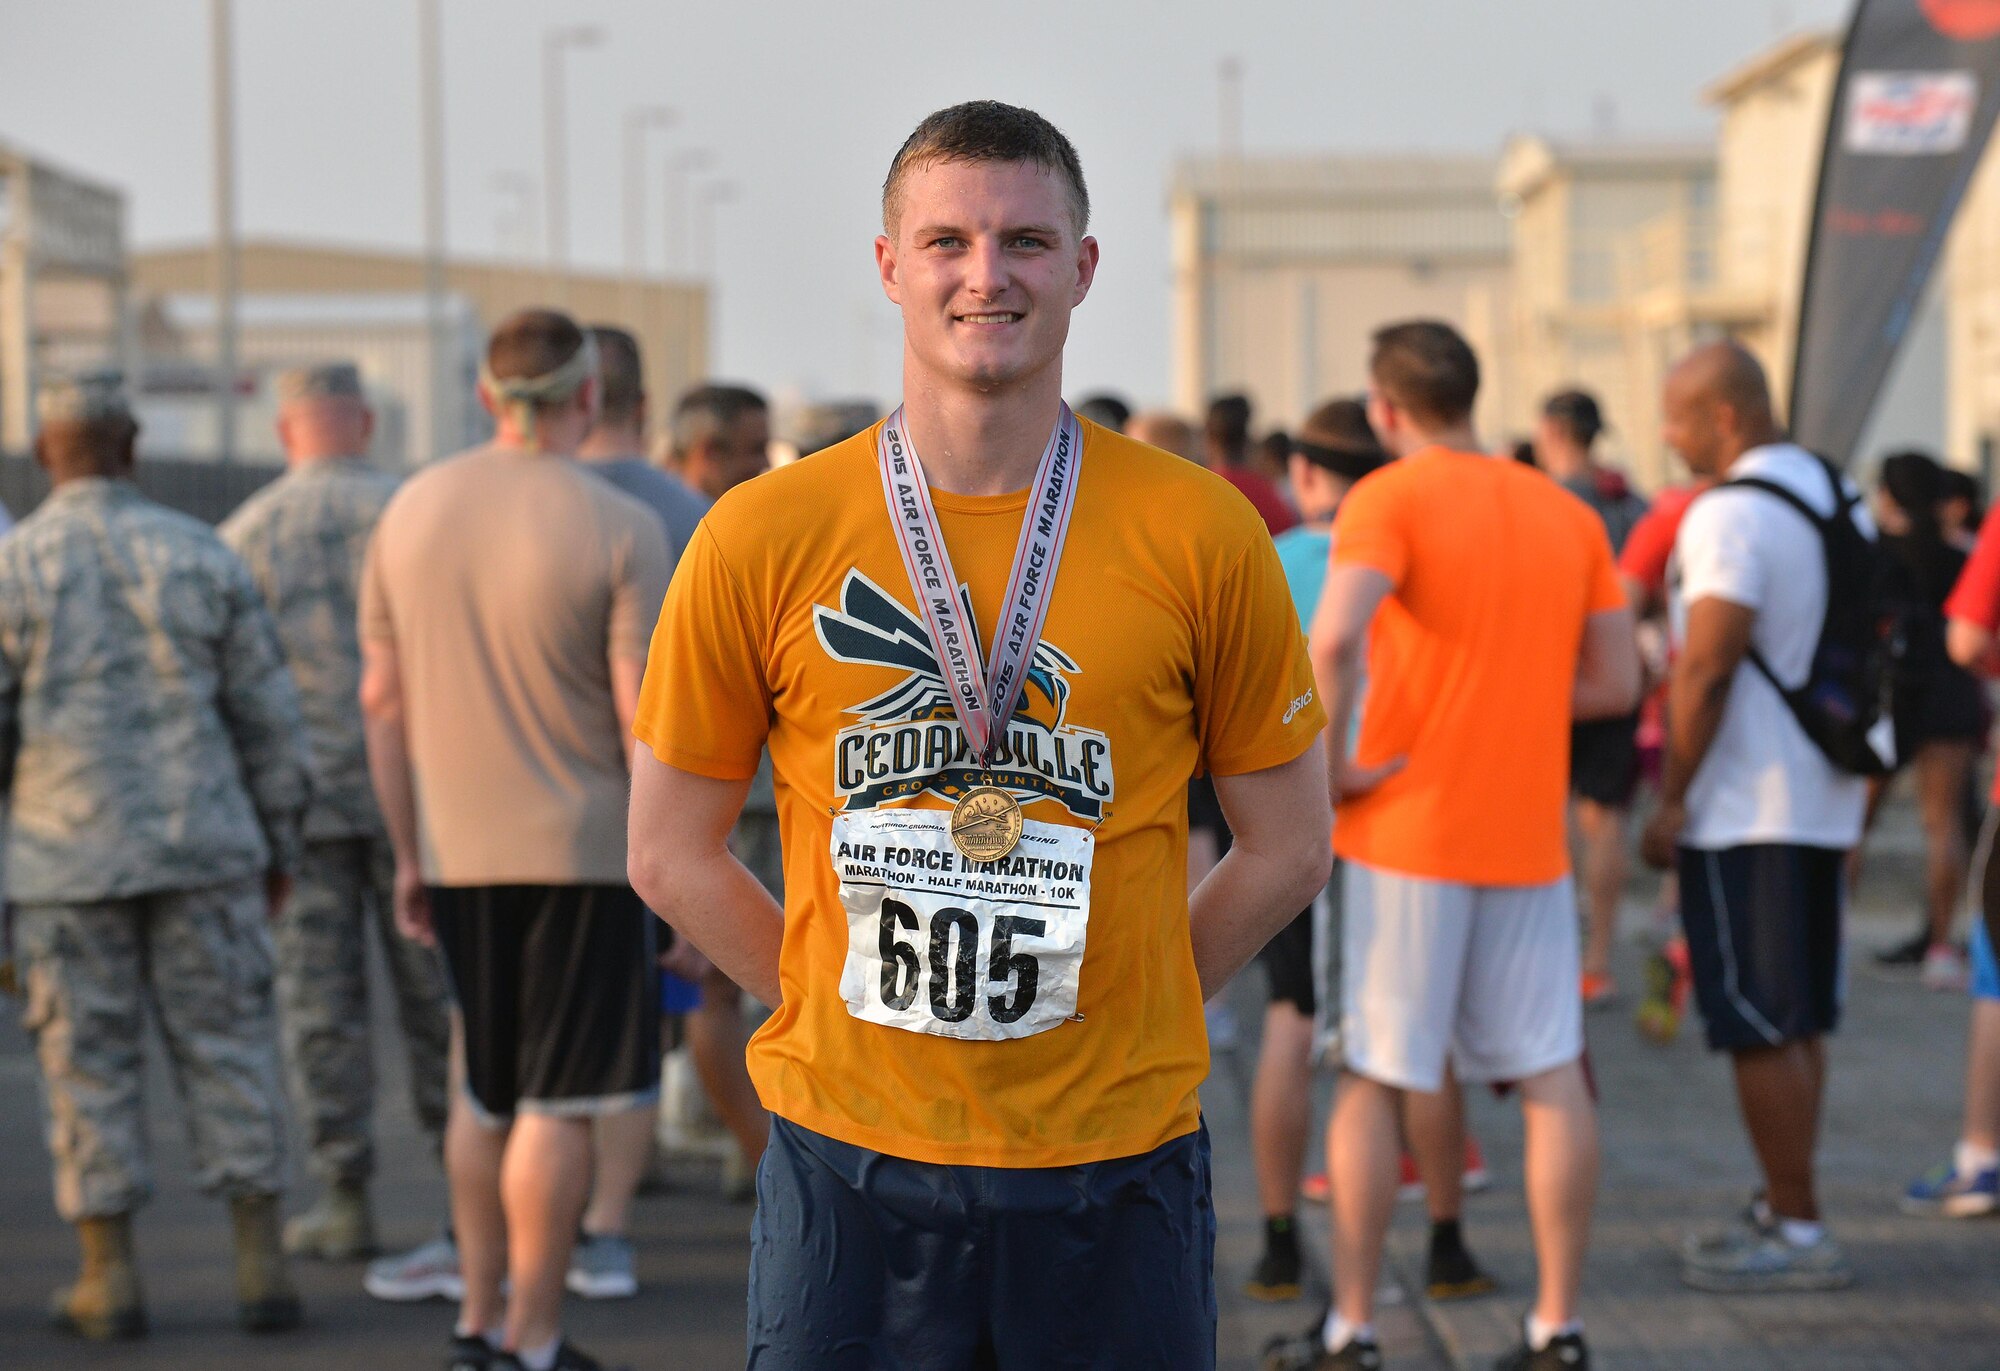 Capt. Hollis, 380th Expeditionary Operations Support Squadron airfield operations flight commander, stands at the finish line after being the first to complete the half marathon at undisclosed location in Southwest Asia Sept. 19, 2015. The run was held in light of the Air Force’s 68th birthday. (U.S. Air Force photo/Tech. Sgt. Jeff Andrejcik)